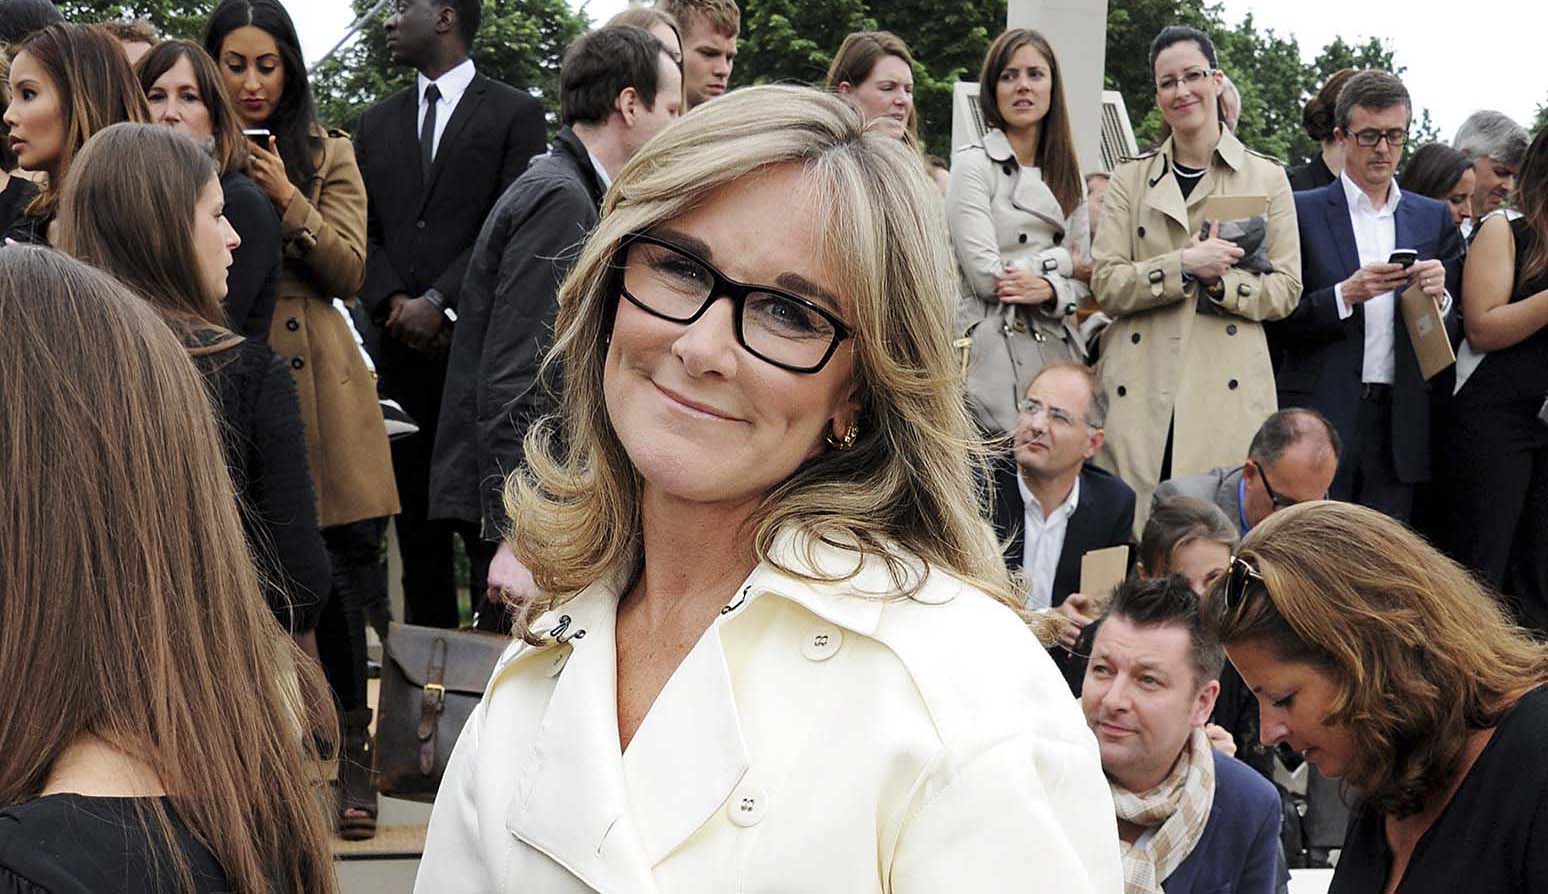 Apple Effect: Angela Ahrendts wins 13 positions in Fortune's “Most Powerful Women” ranking